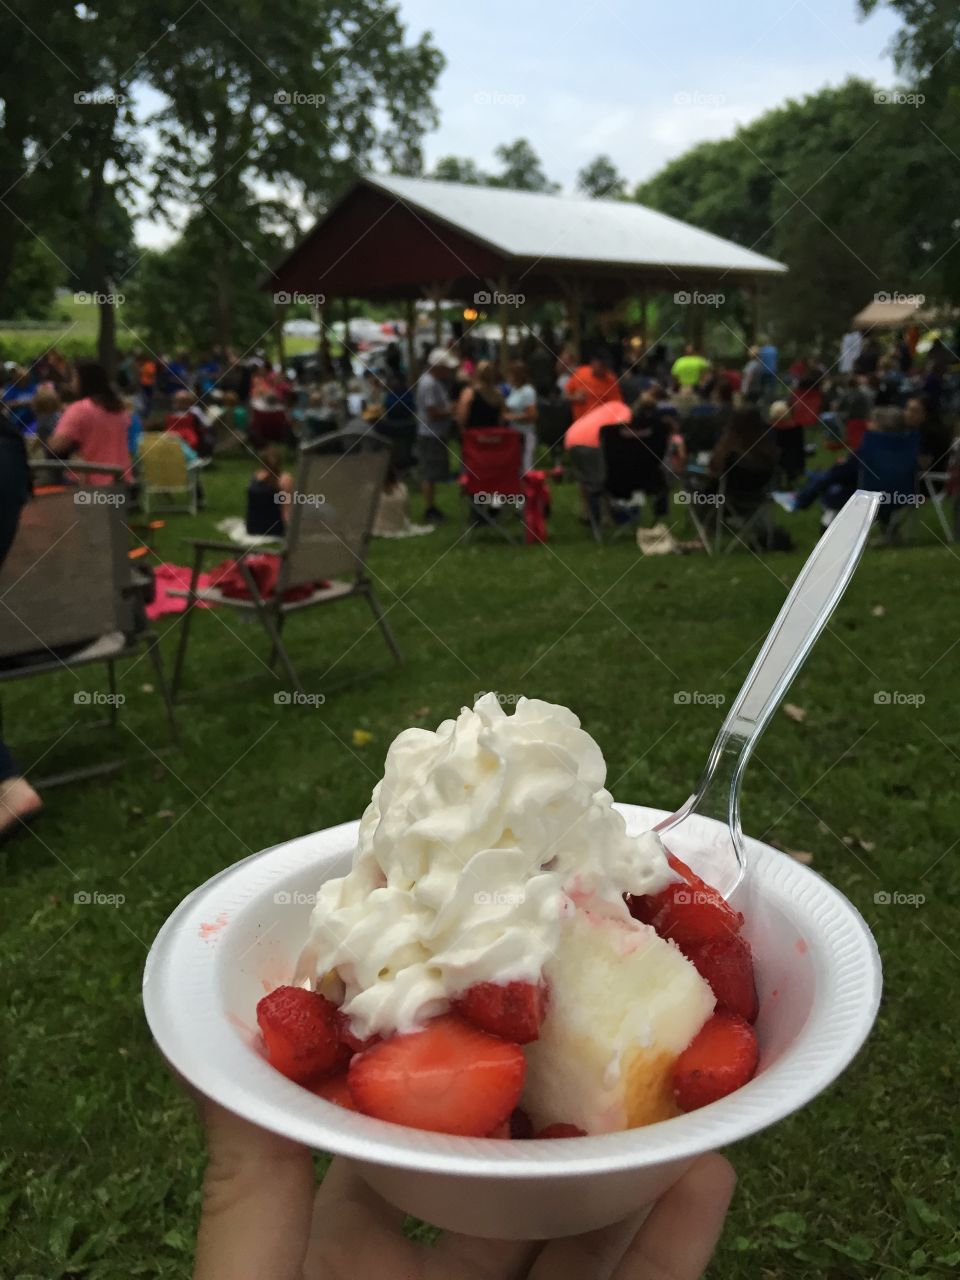 Strawberry cohort cake in the park